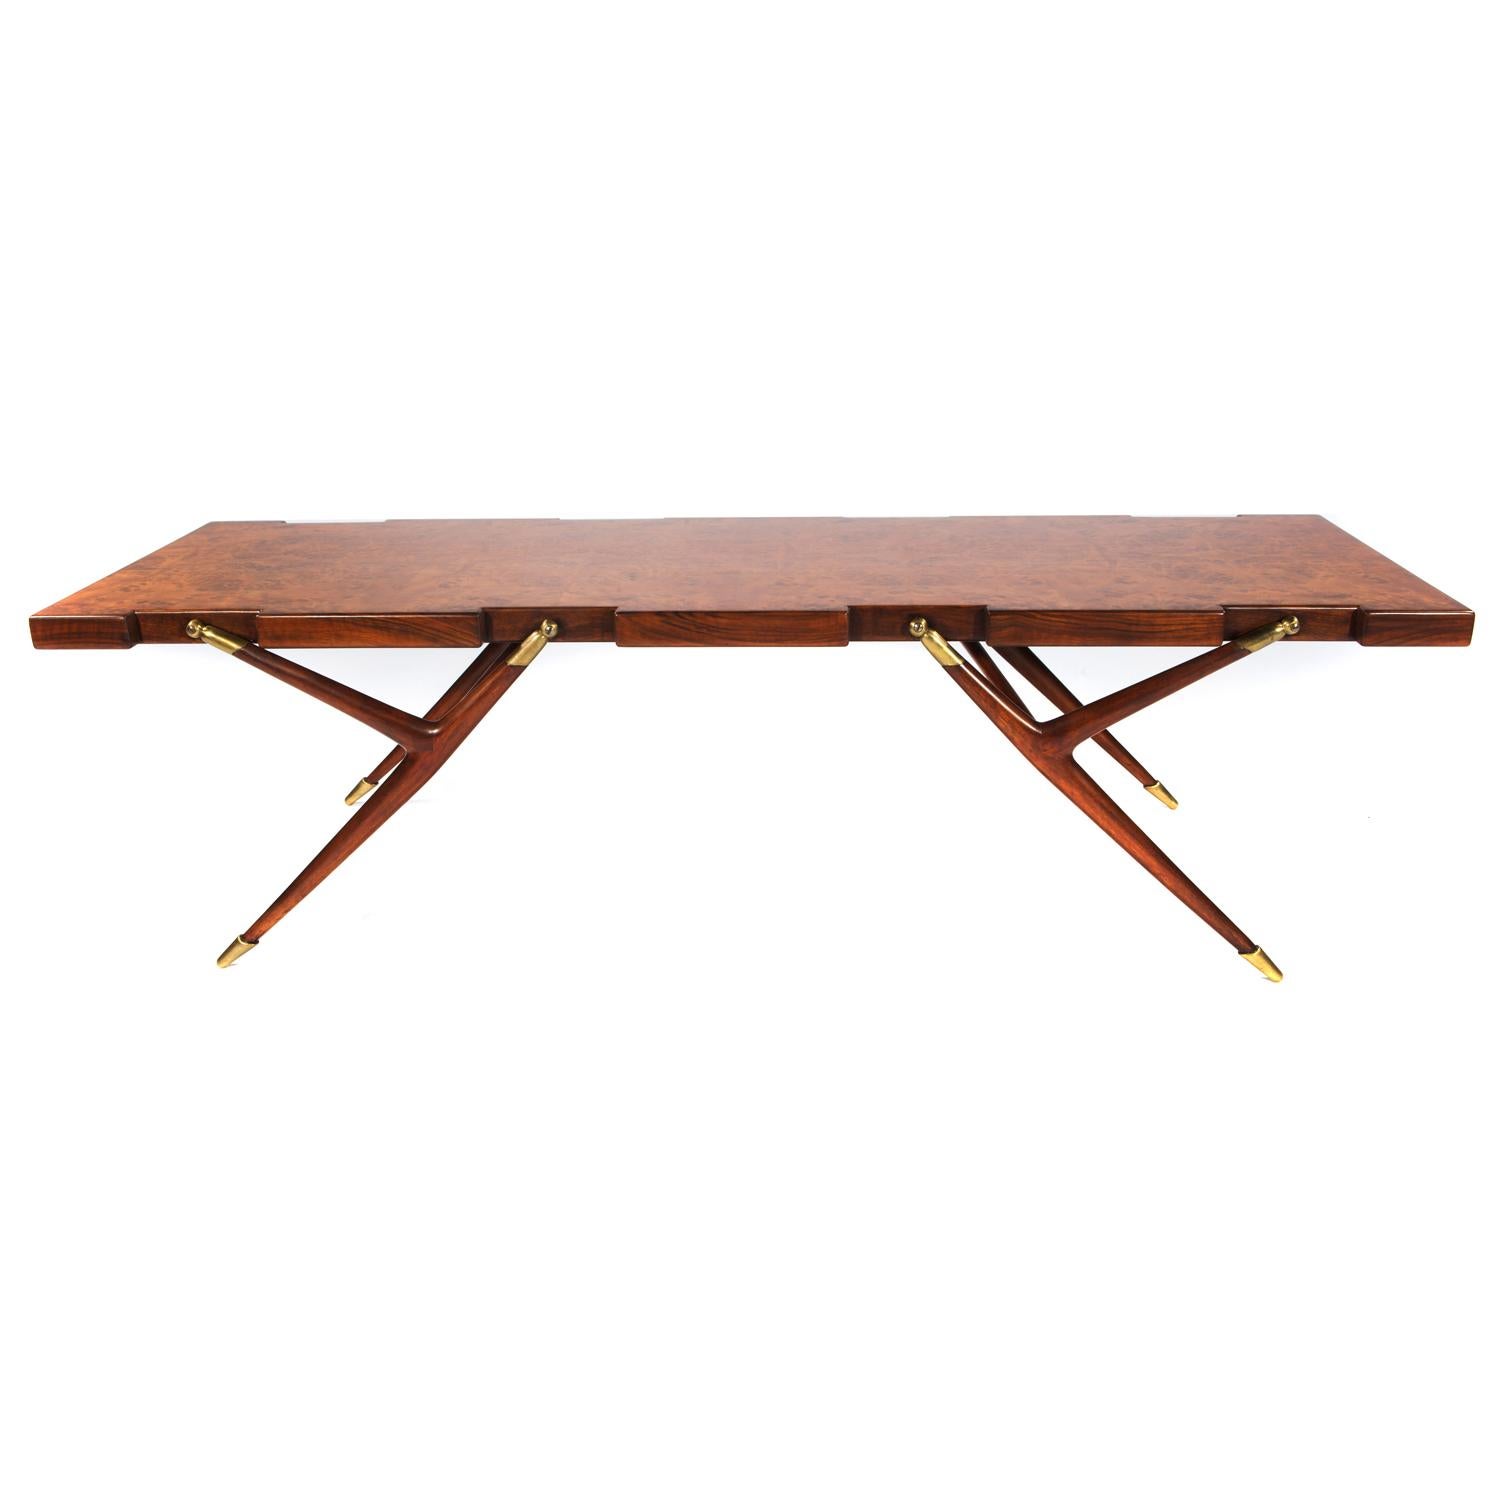 Exceptional coffee table in book-matched Italian burled walnut with sculptural legs and brass fittings by Ico Parisi (Italy) for M. Singer & Sons, American, 1950's. This table is a tour-de-force of design.